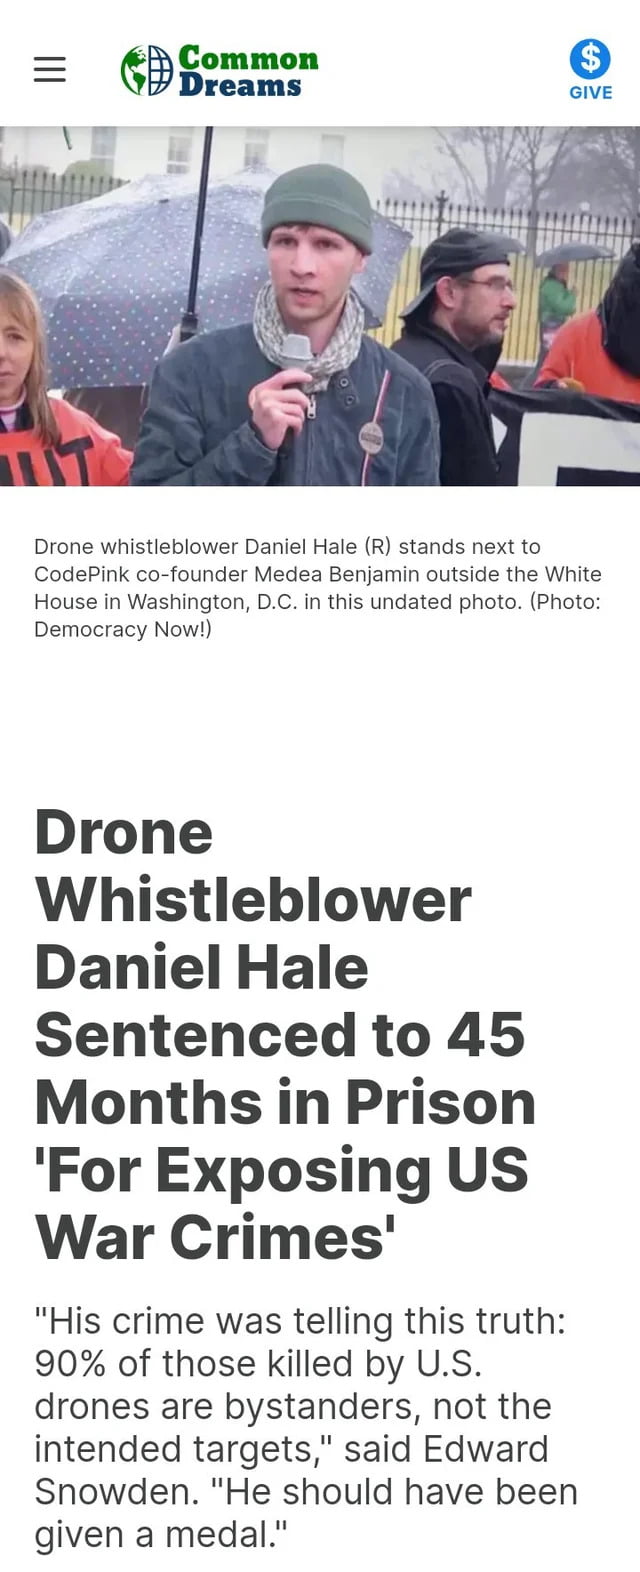 Drone whistleblower charged on the basis of the 100-year old espionage act (same as Assange) has been moved to Gitmo North. Supermax penitentiary for terrorists